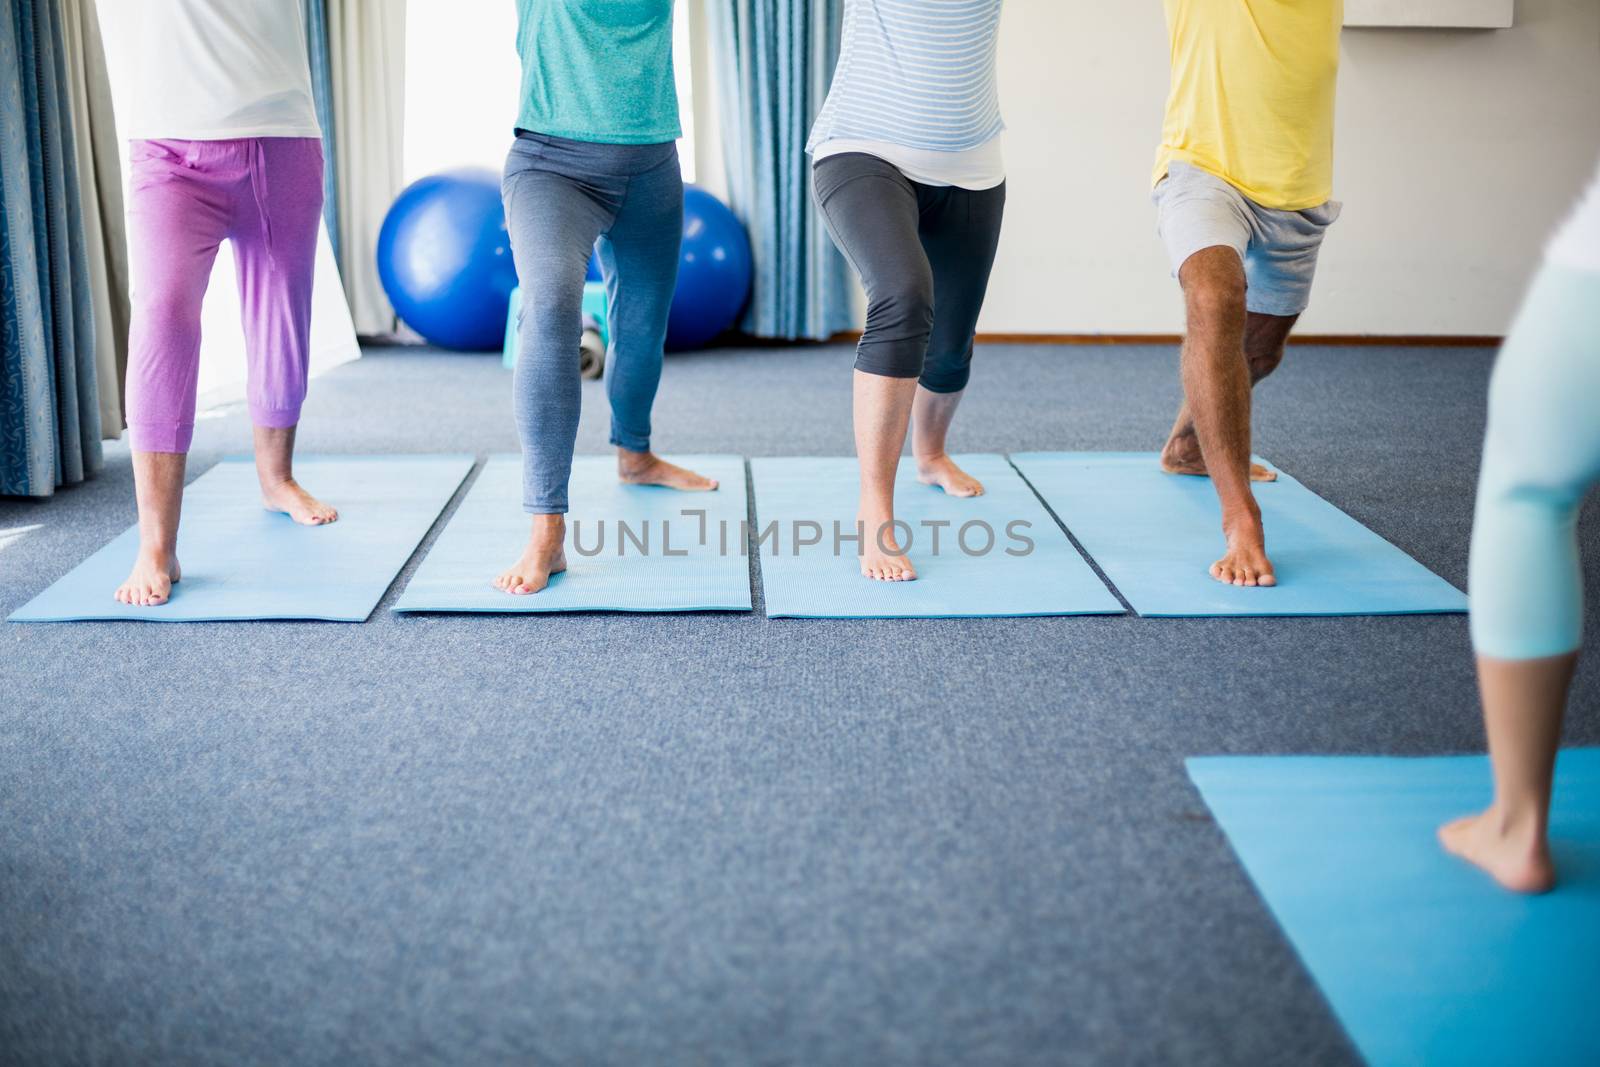 Instructor performing yoga with seniors during sports class